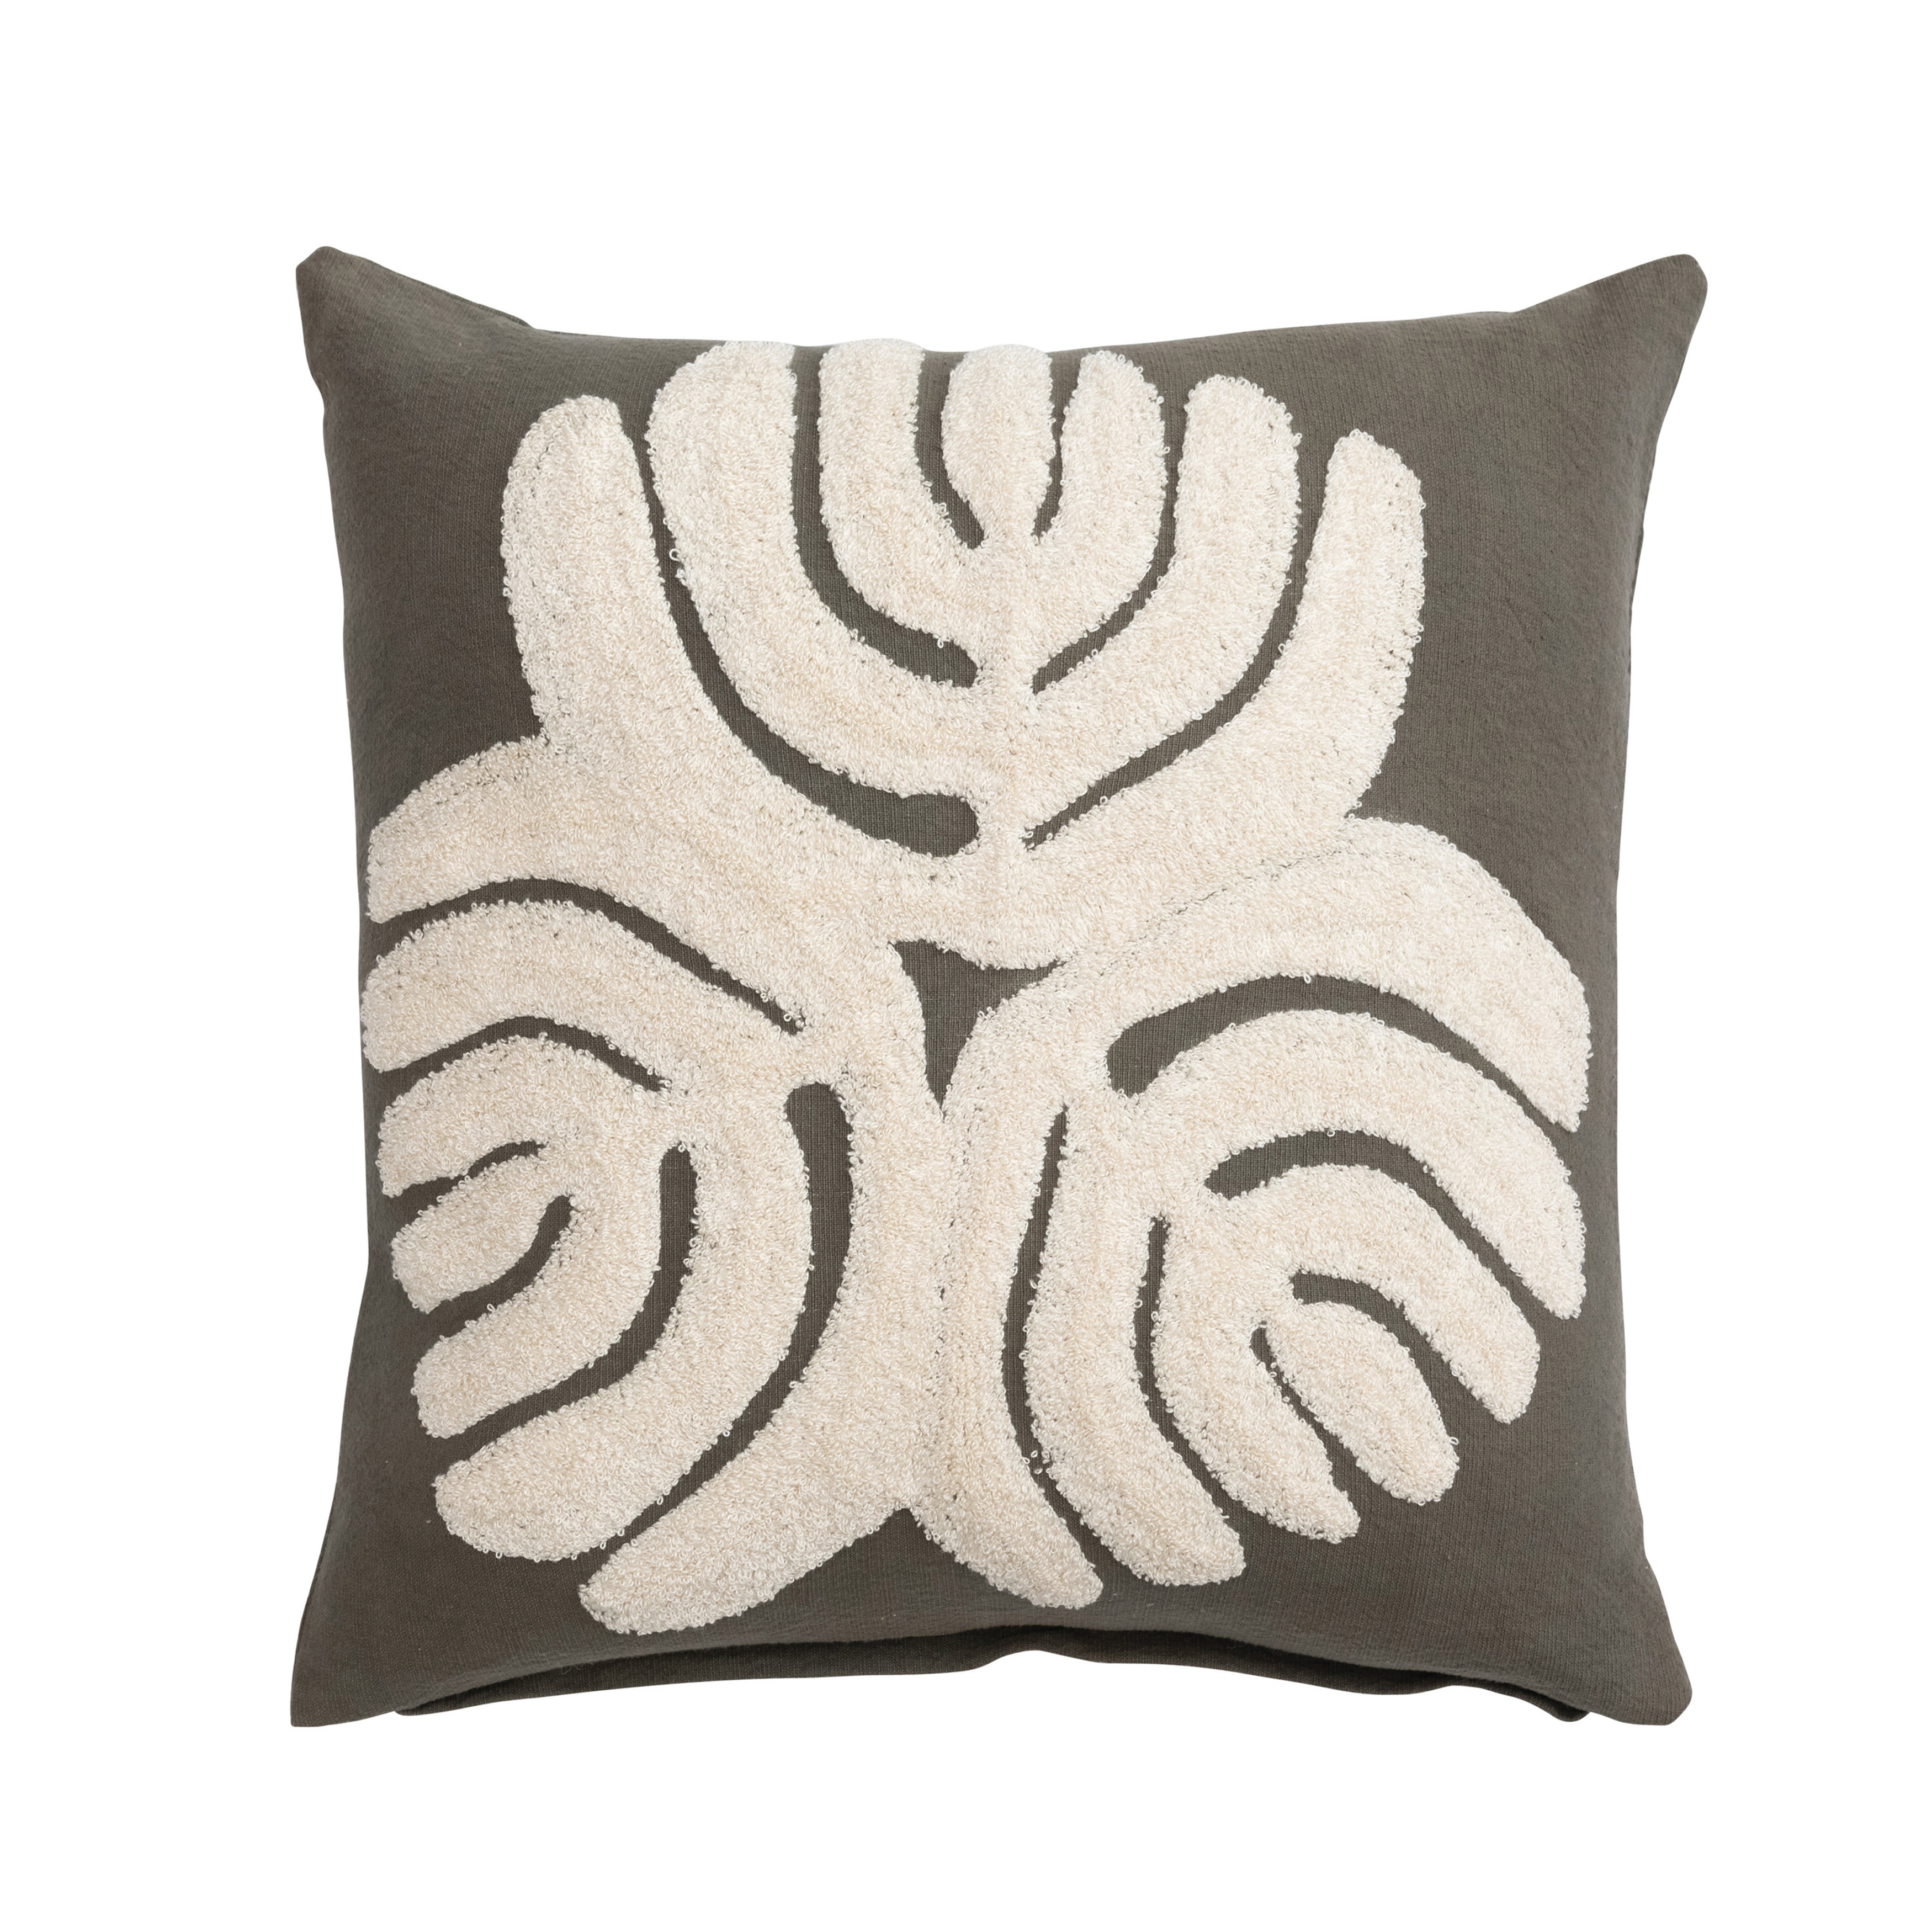  Cotton Slub Pillow Cover with Embroidery and Abstract Design, Olive Green and Cream - Image 0